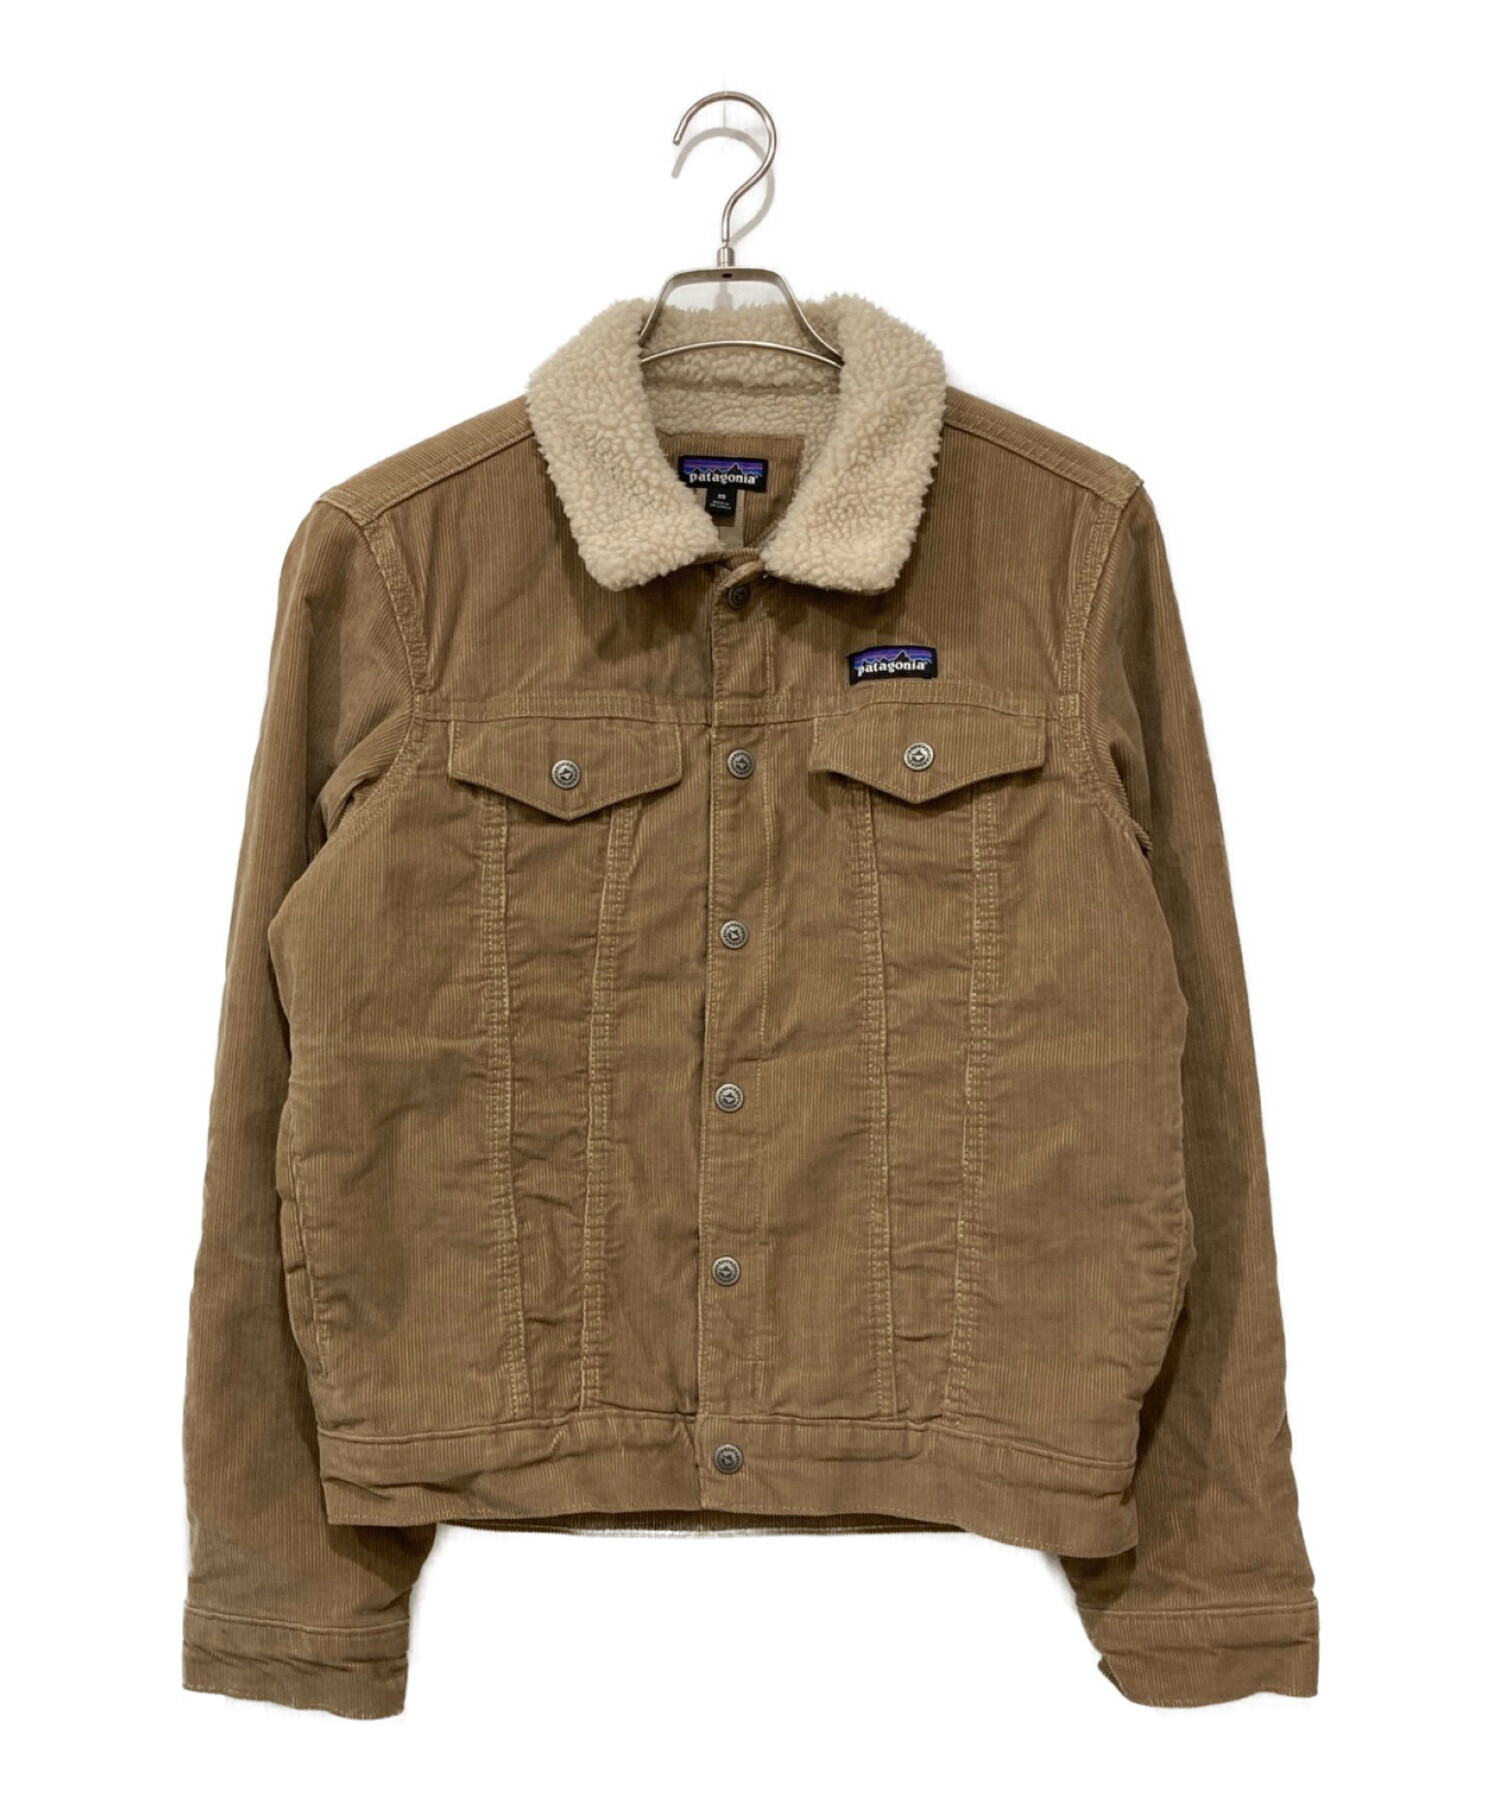 Patagonia pile lined trucker jacket